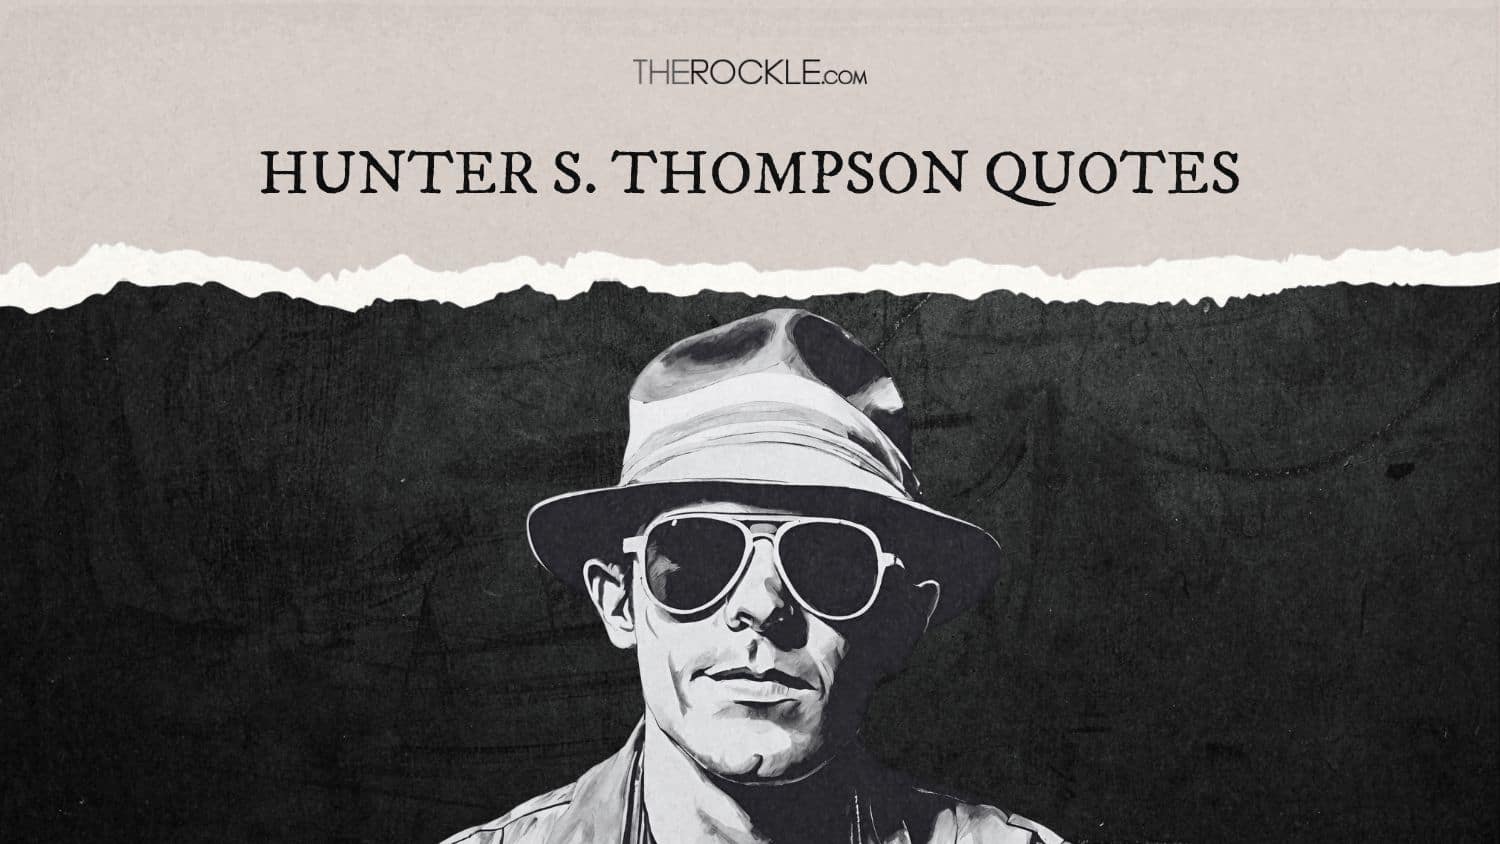 10 Hunter S. Thompson Quotes for the Wild at Heart